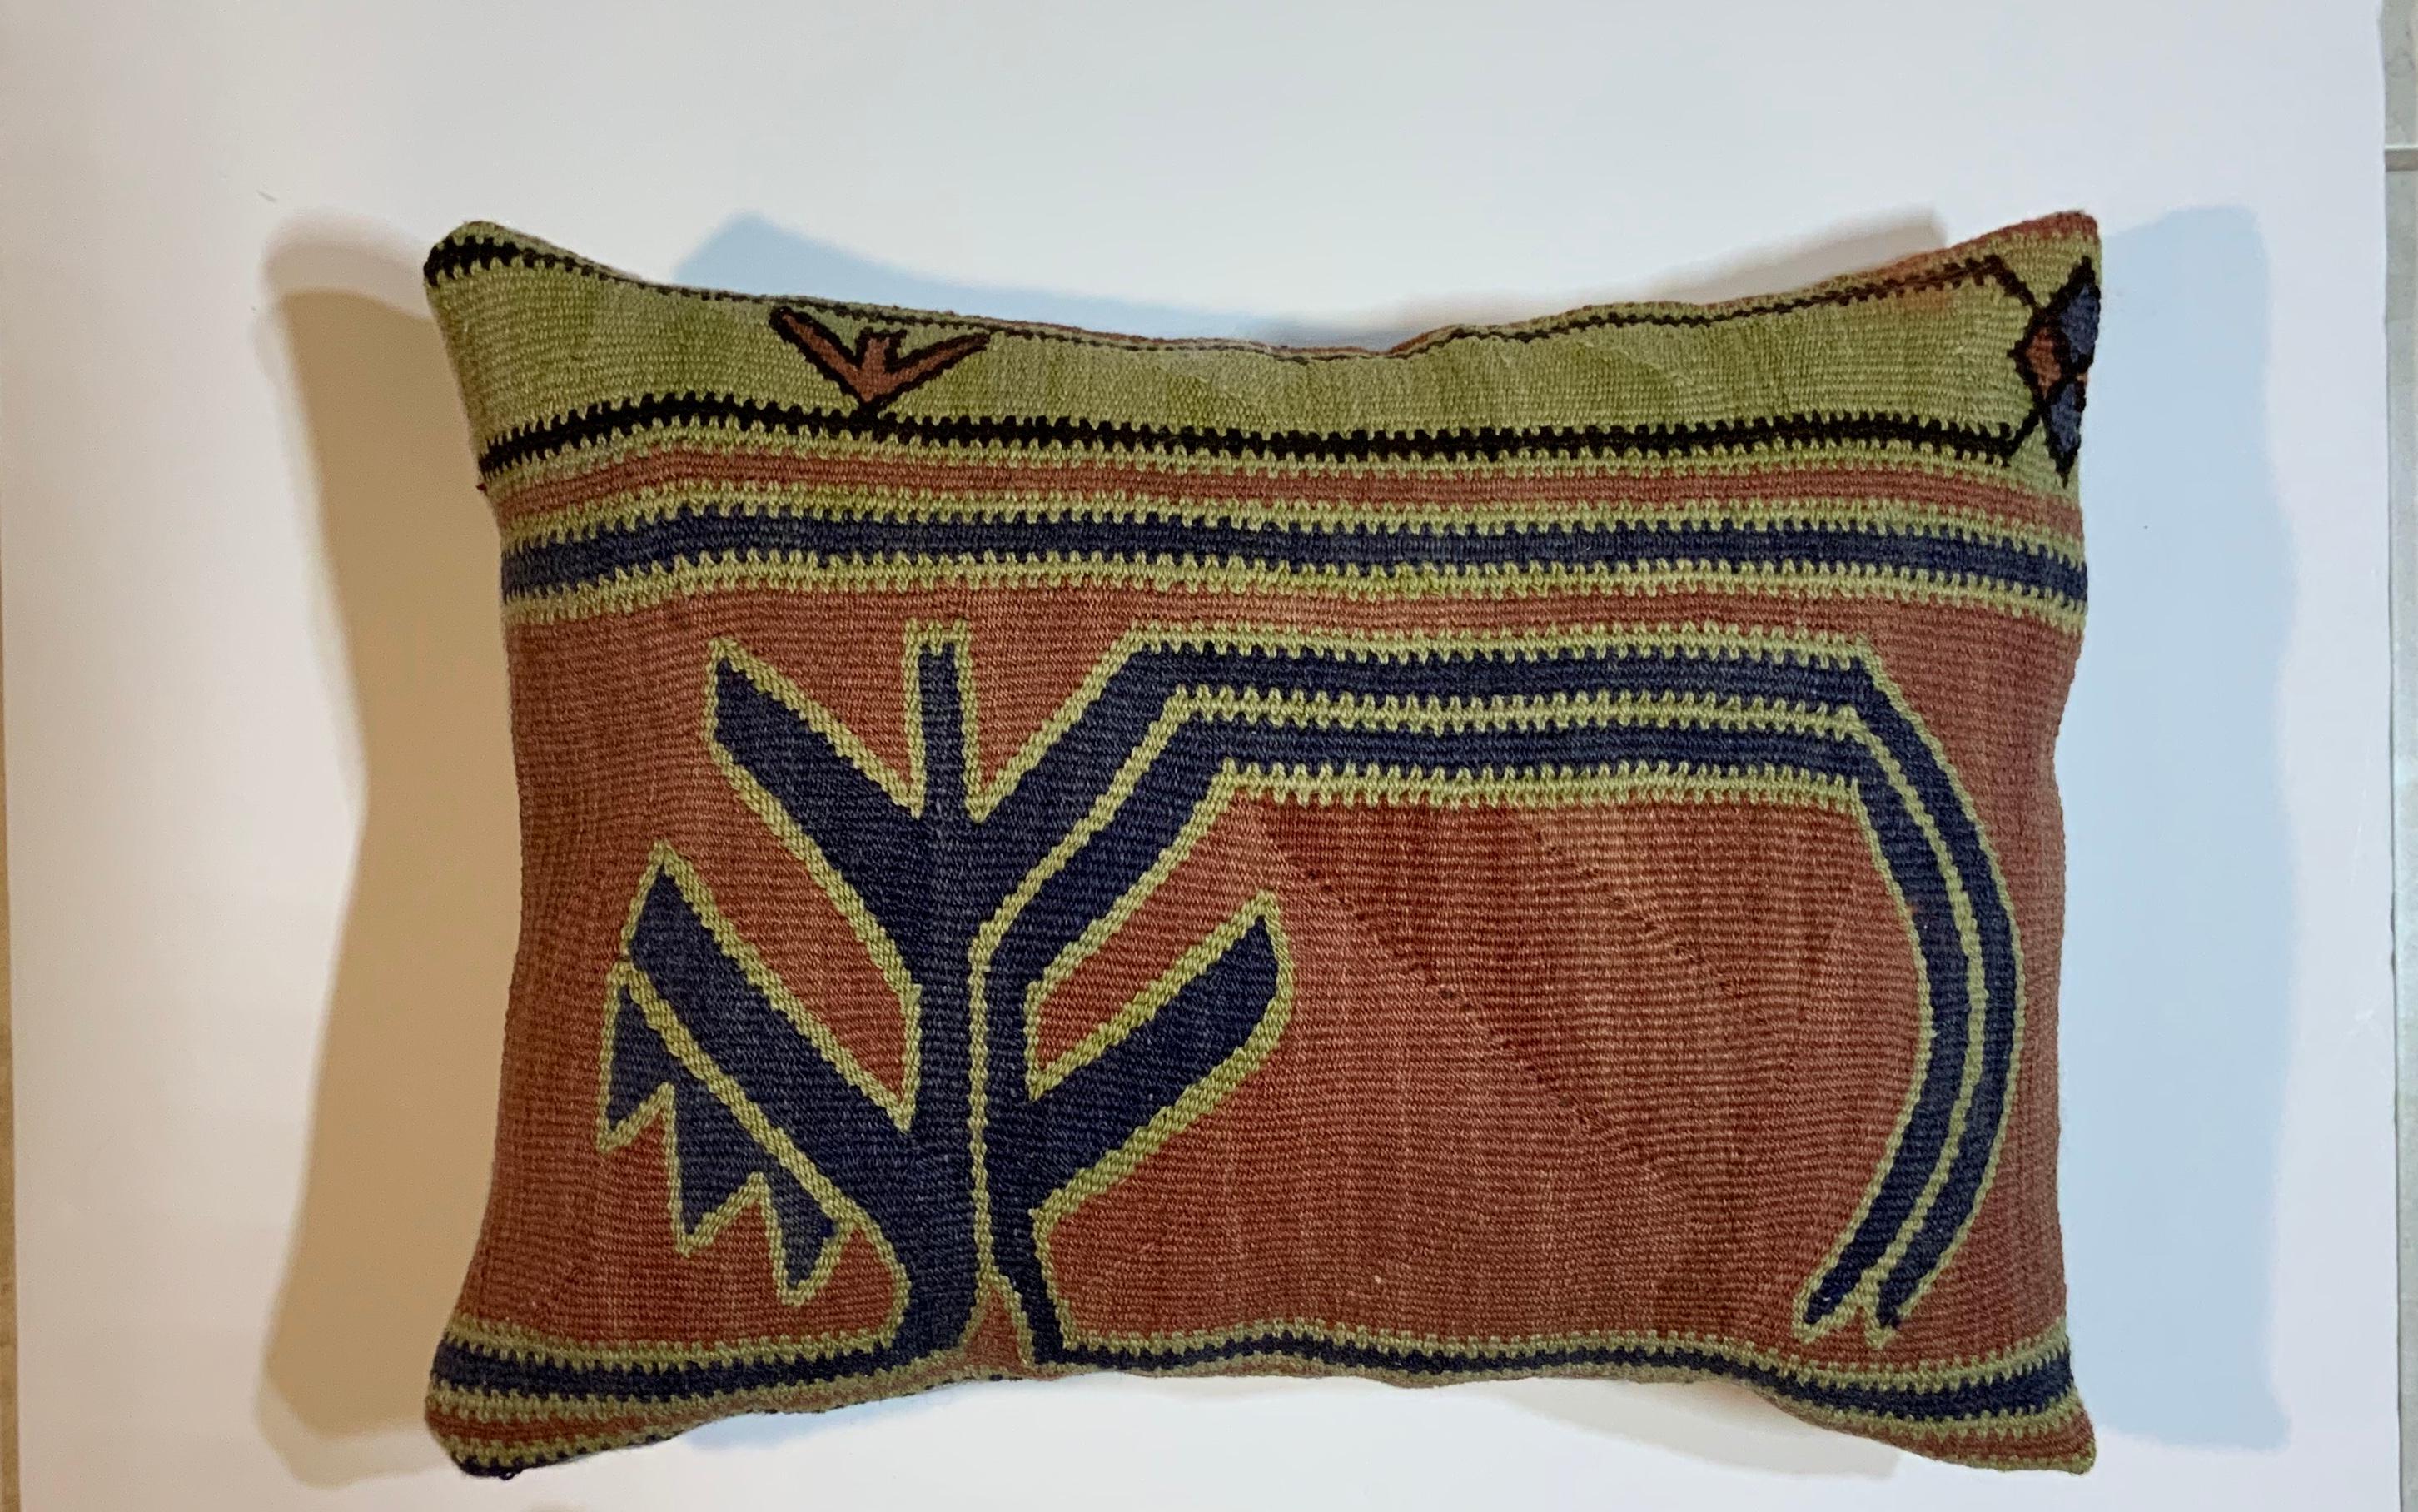 Exceptional pair of pillows made of handwoven flat-weave antique rug fragment, beautiful geometric motif.
Fine linen backing, frash inserts.
Sizes:
1. 10” x 13” x 4”
2. 11” x 15” x 4”.